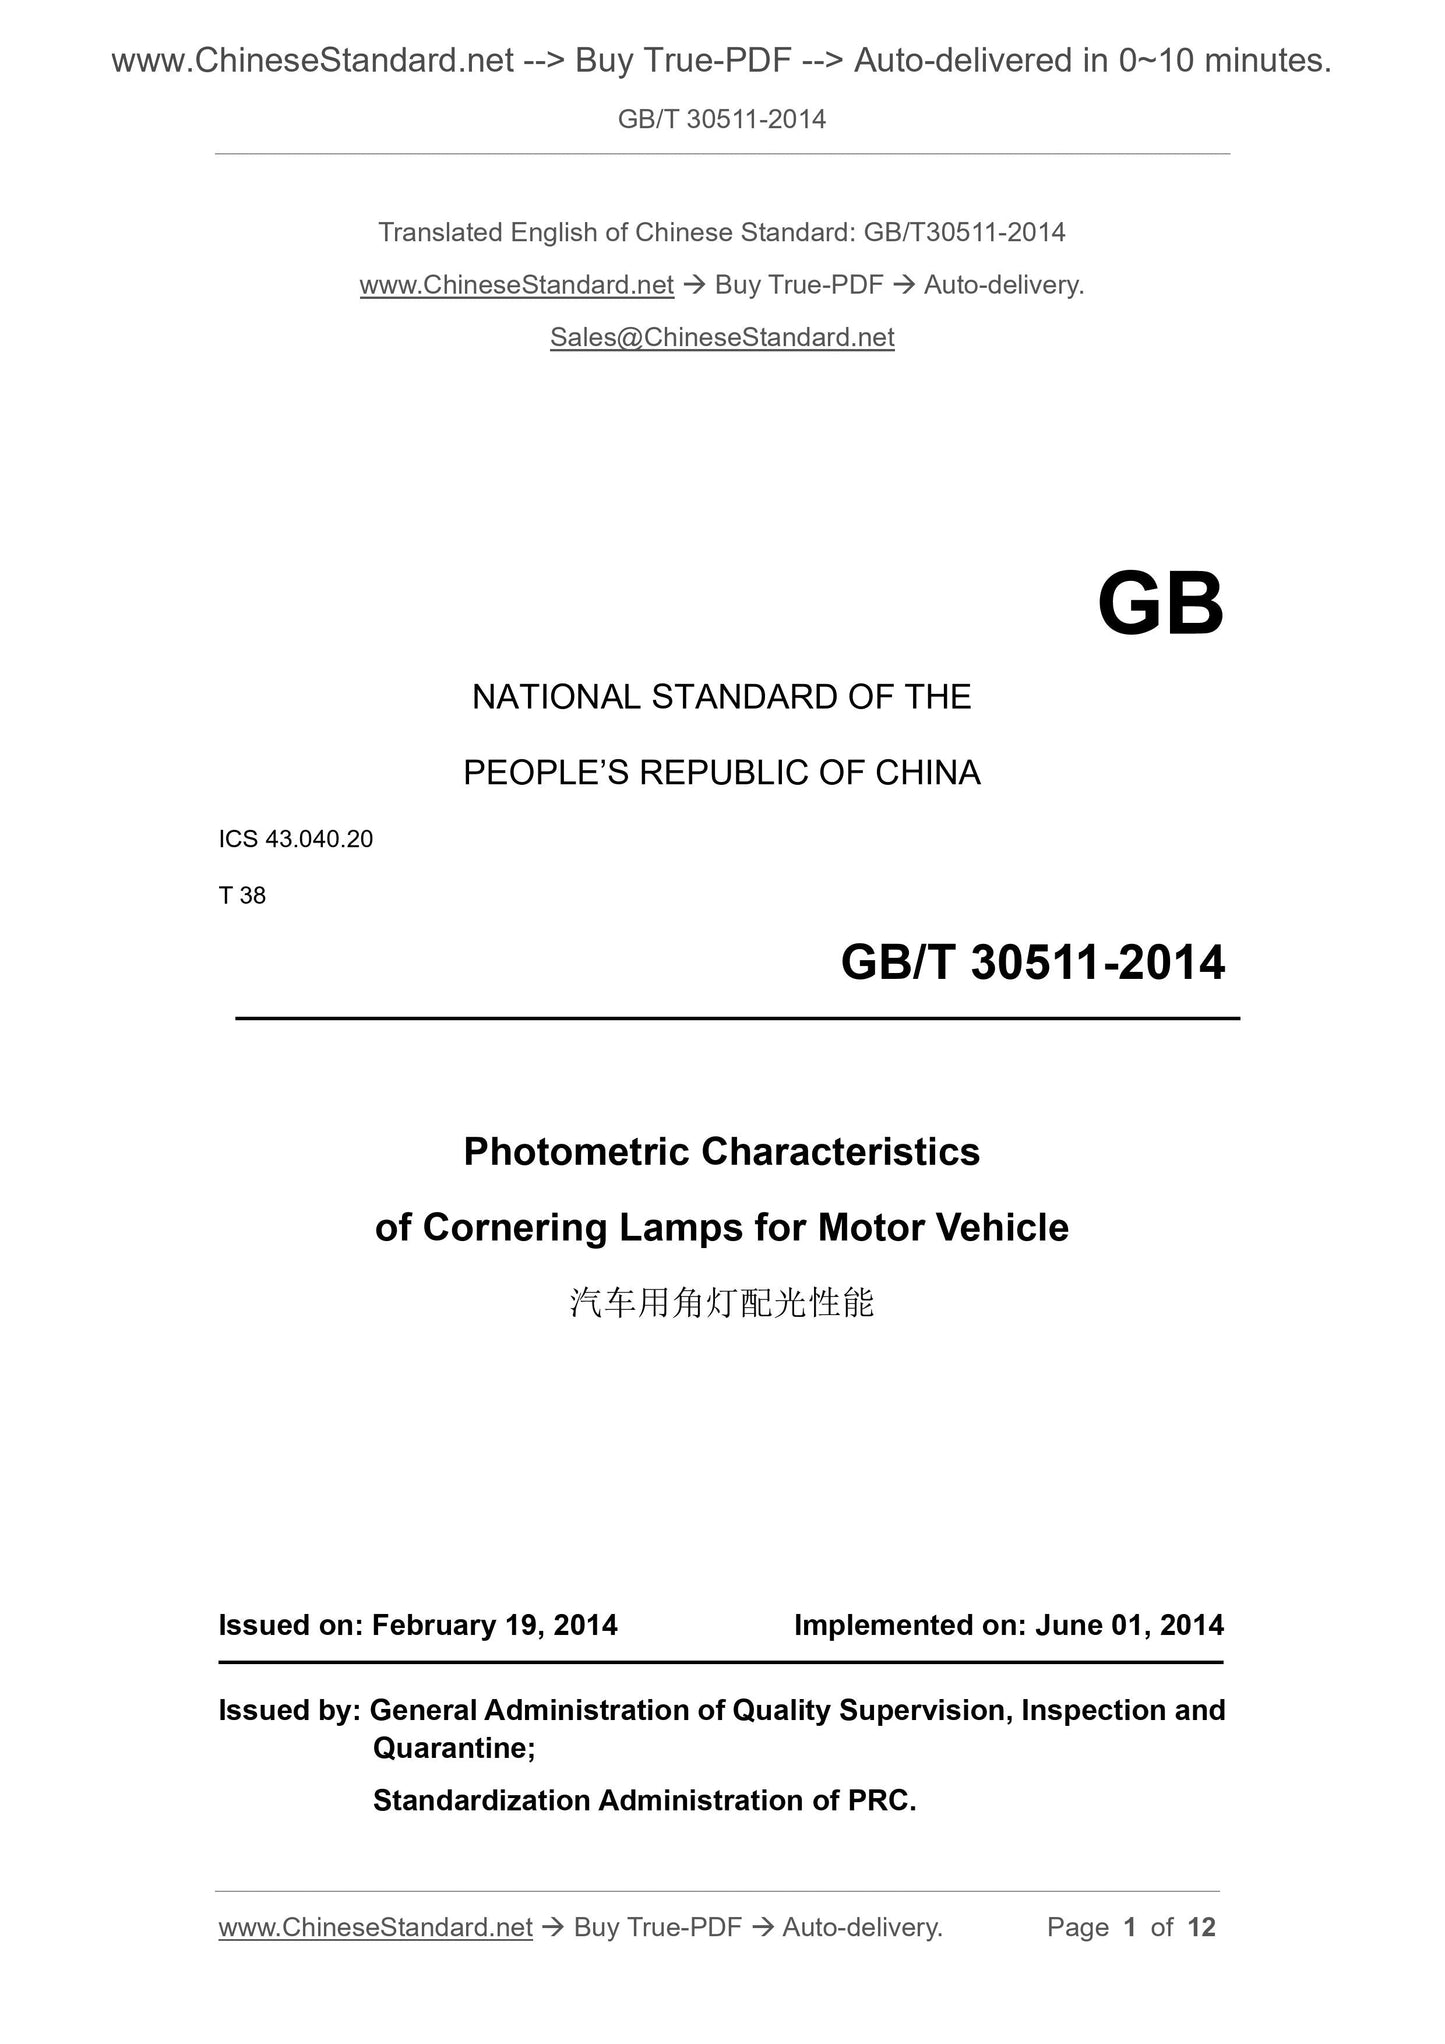 GB/T 30511-2014 Page 1